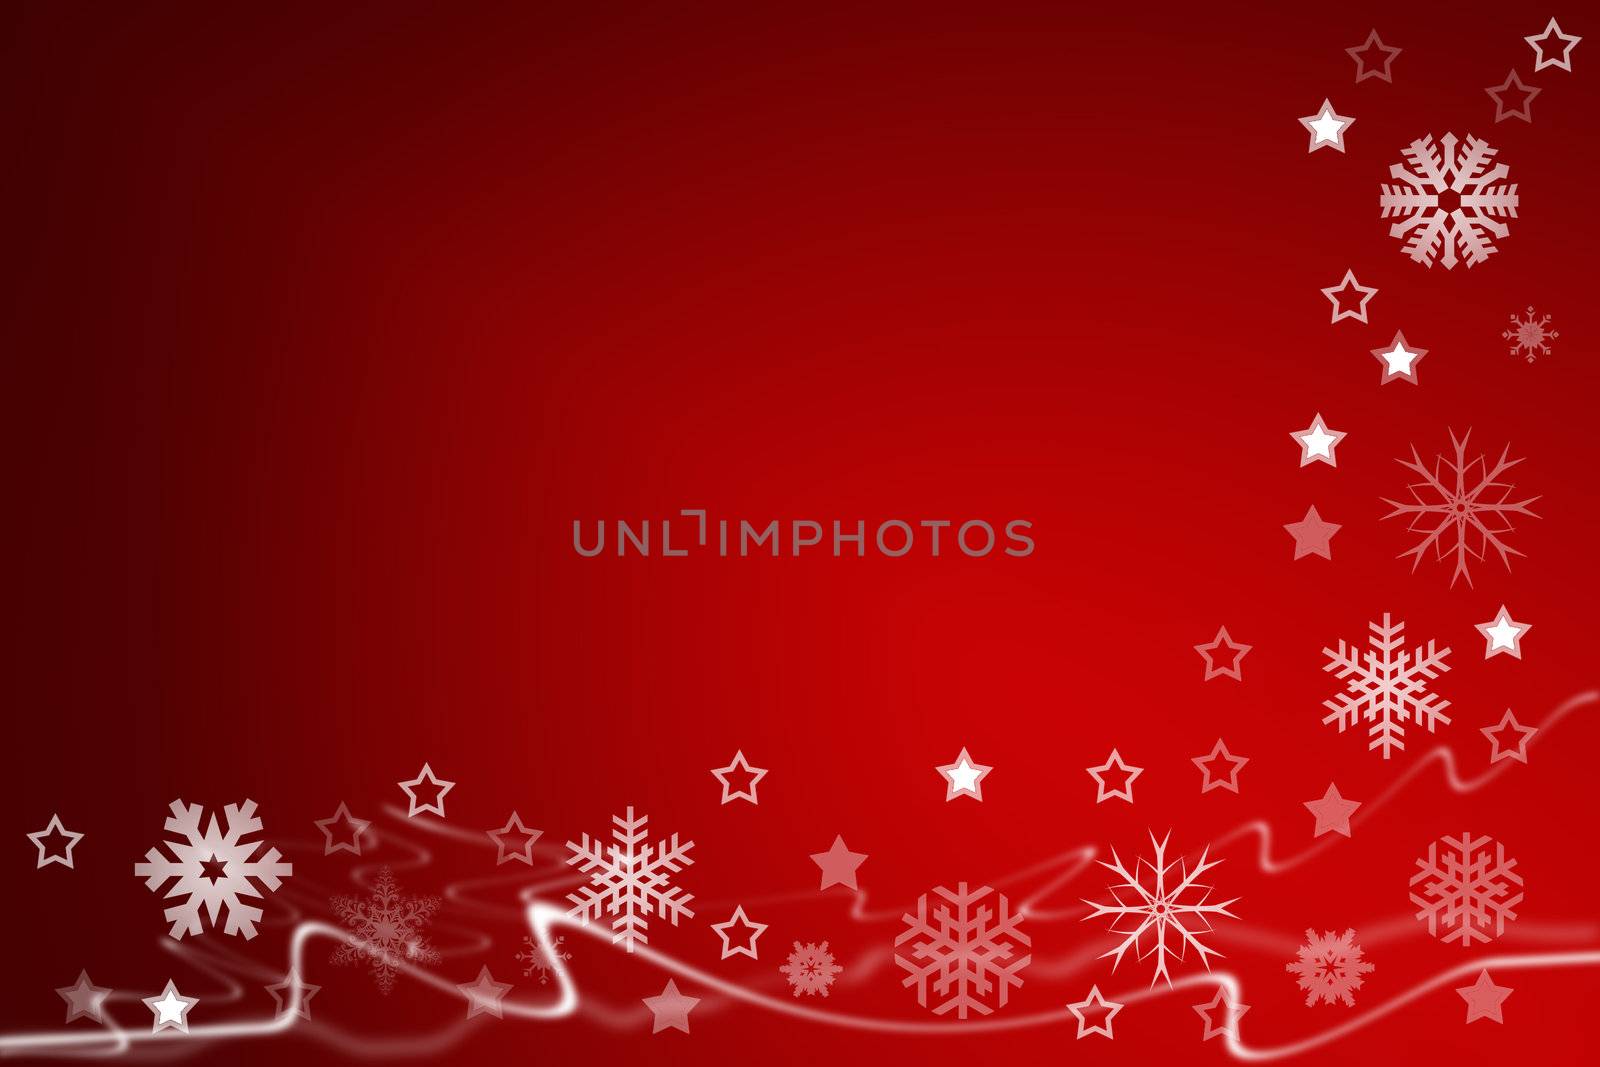 christmas background for your designs with stars and snowflakes
